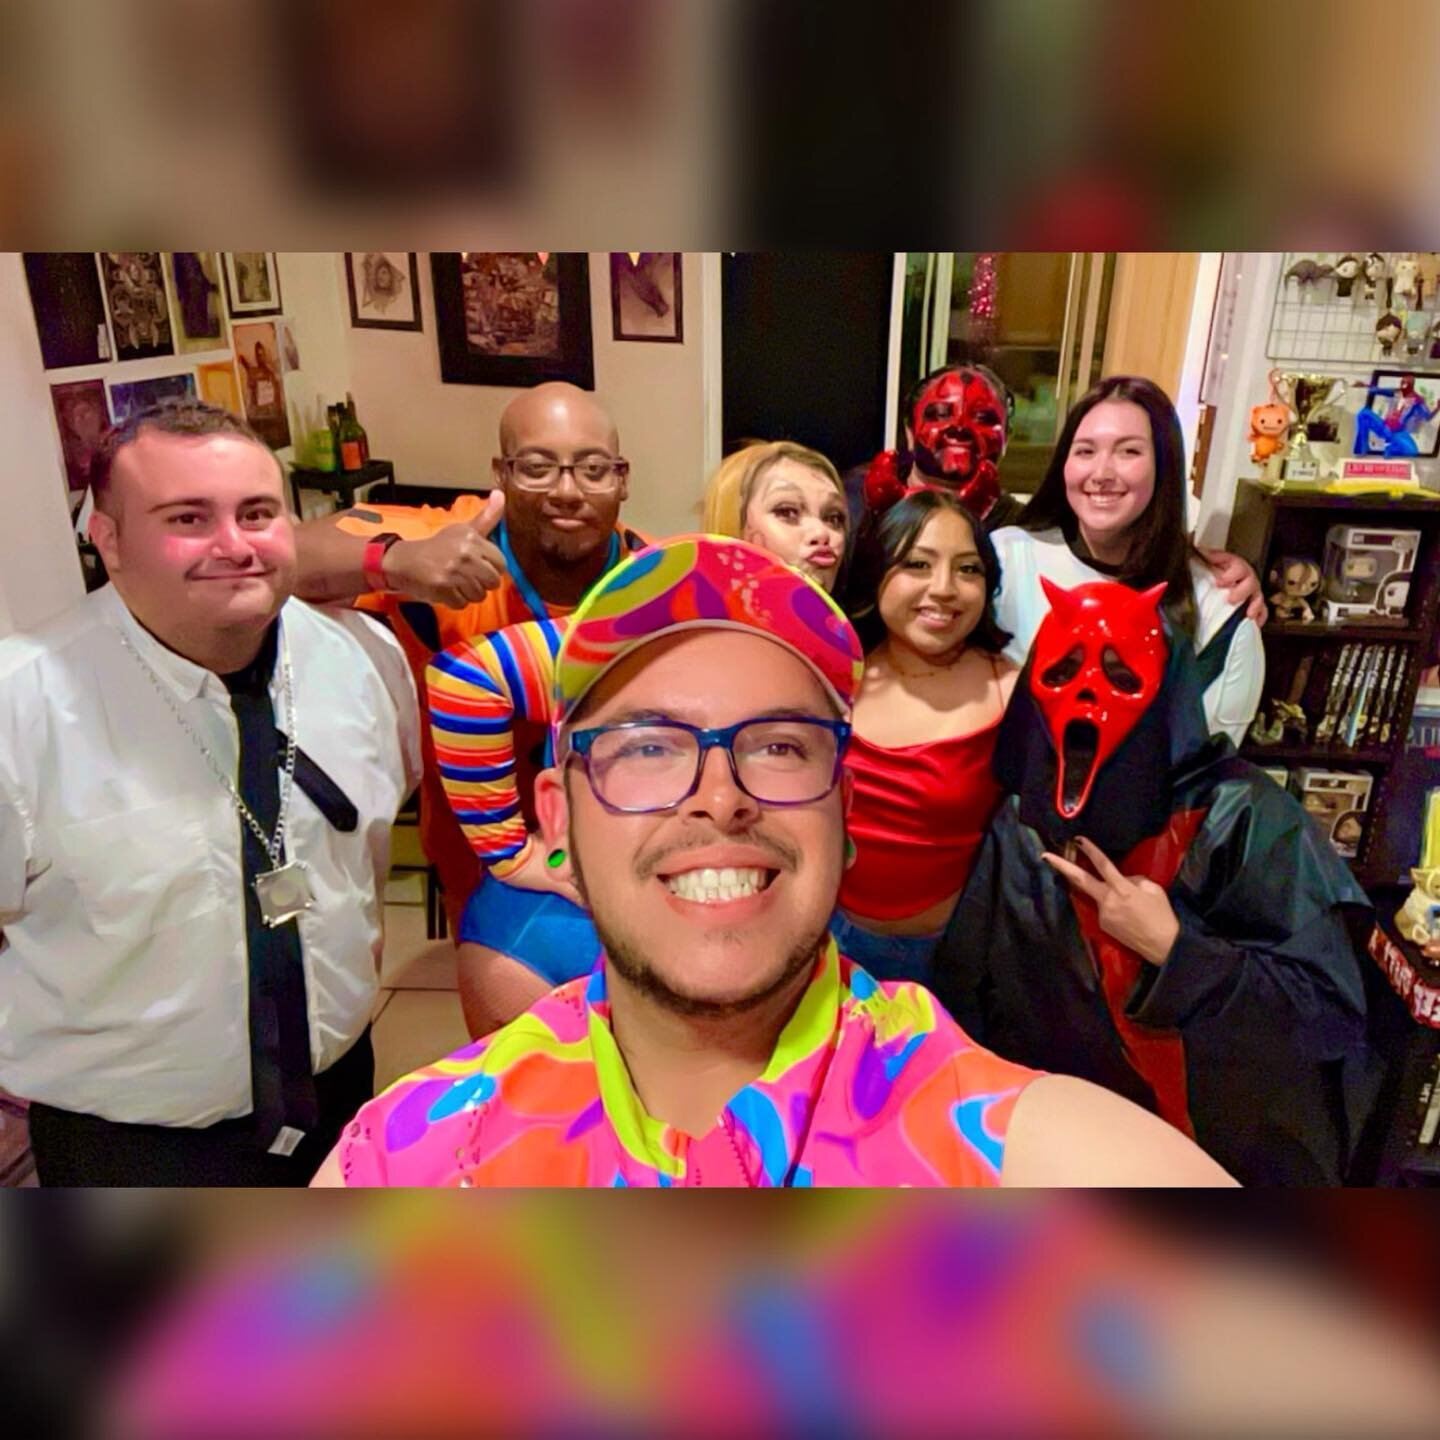 Here&rsquo;s some pics from our Halloween Potluck we did on the 10/21. We had a blast with Halloween themed foods and scary movies! Thank to everyone who came! 😃

#halloween #halloweenpotluck #potluck #potluckparty #costumes #cosplay #imjustken #chu